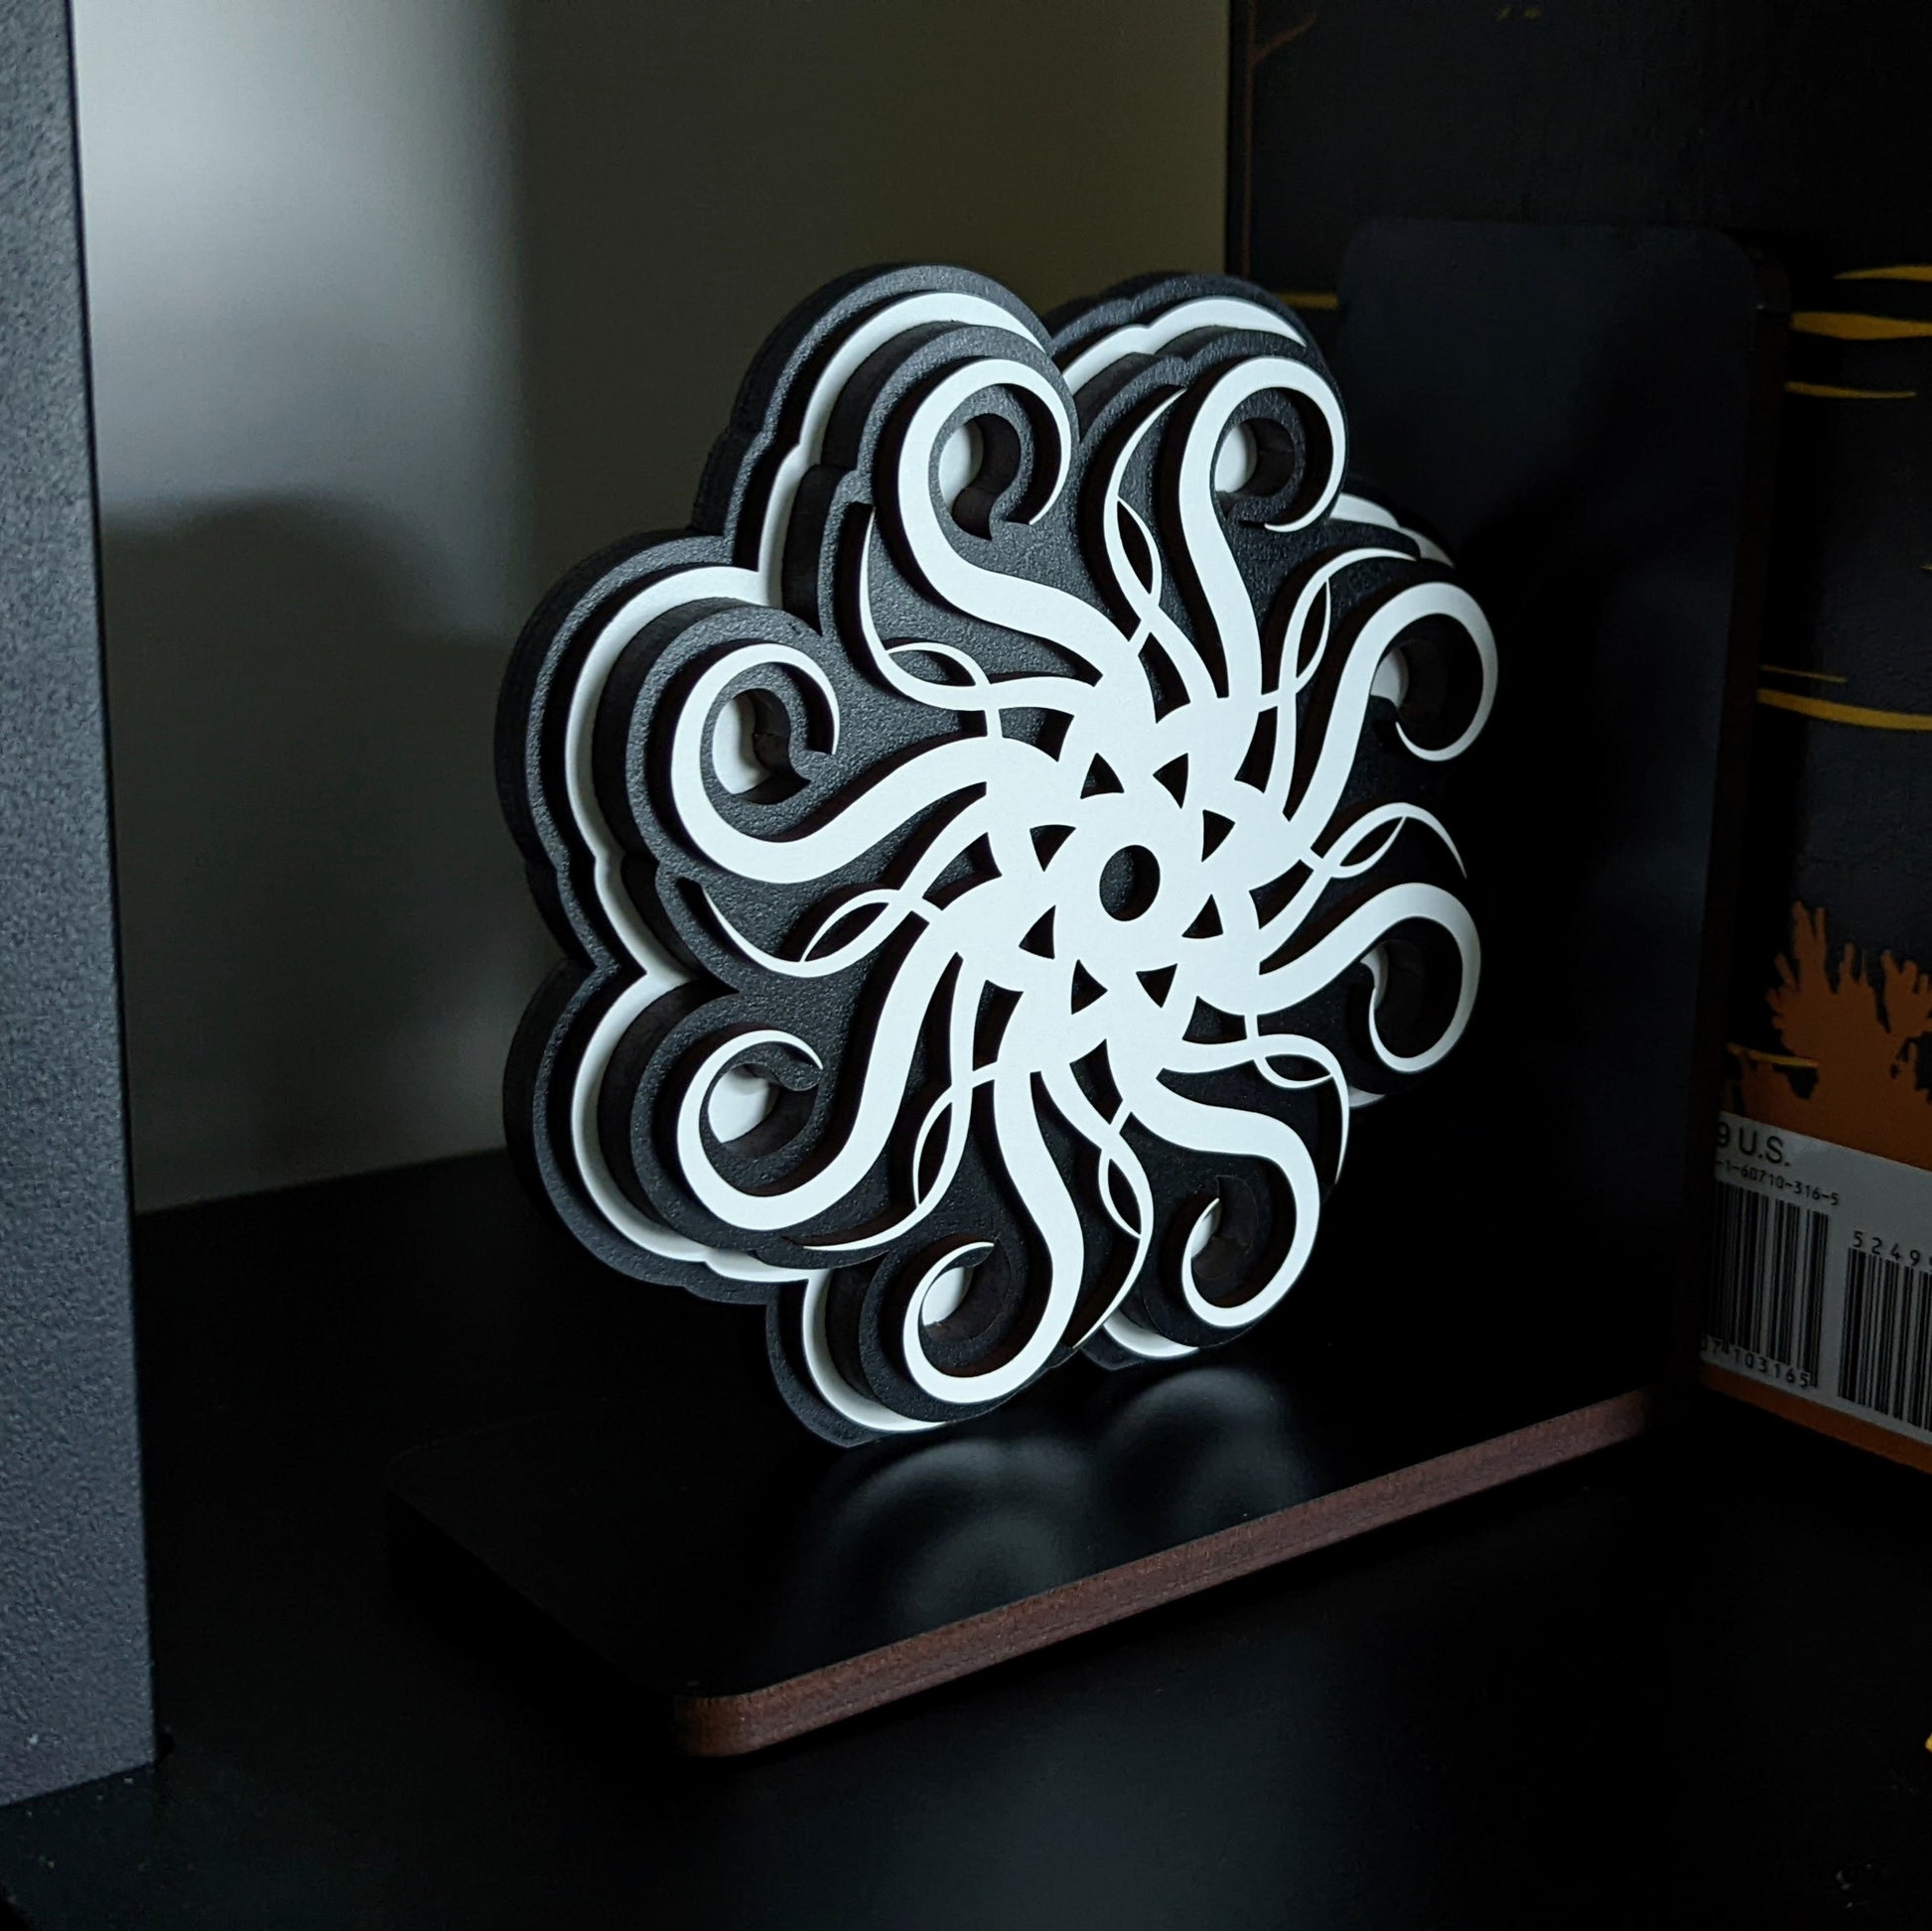 wooden bookends inspired by lightweaver cryptics spren from brandon sanderson stormlight archive